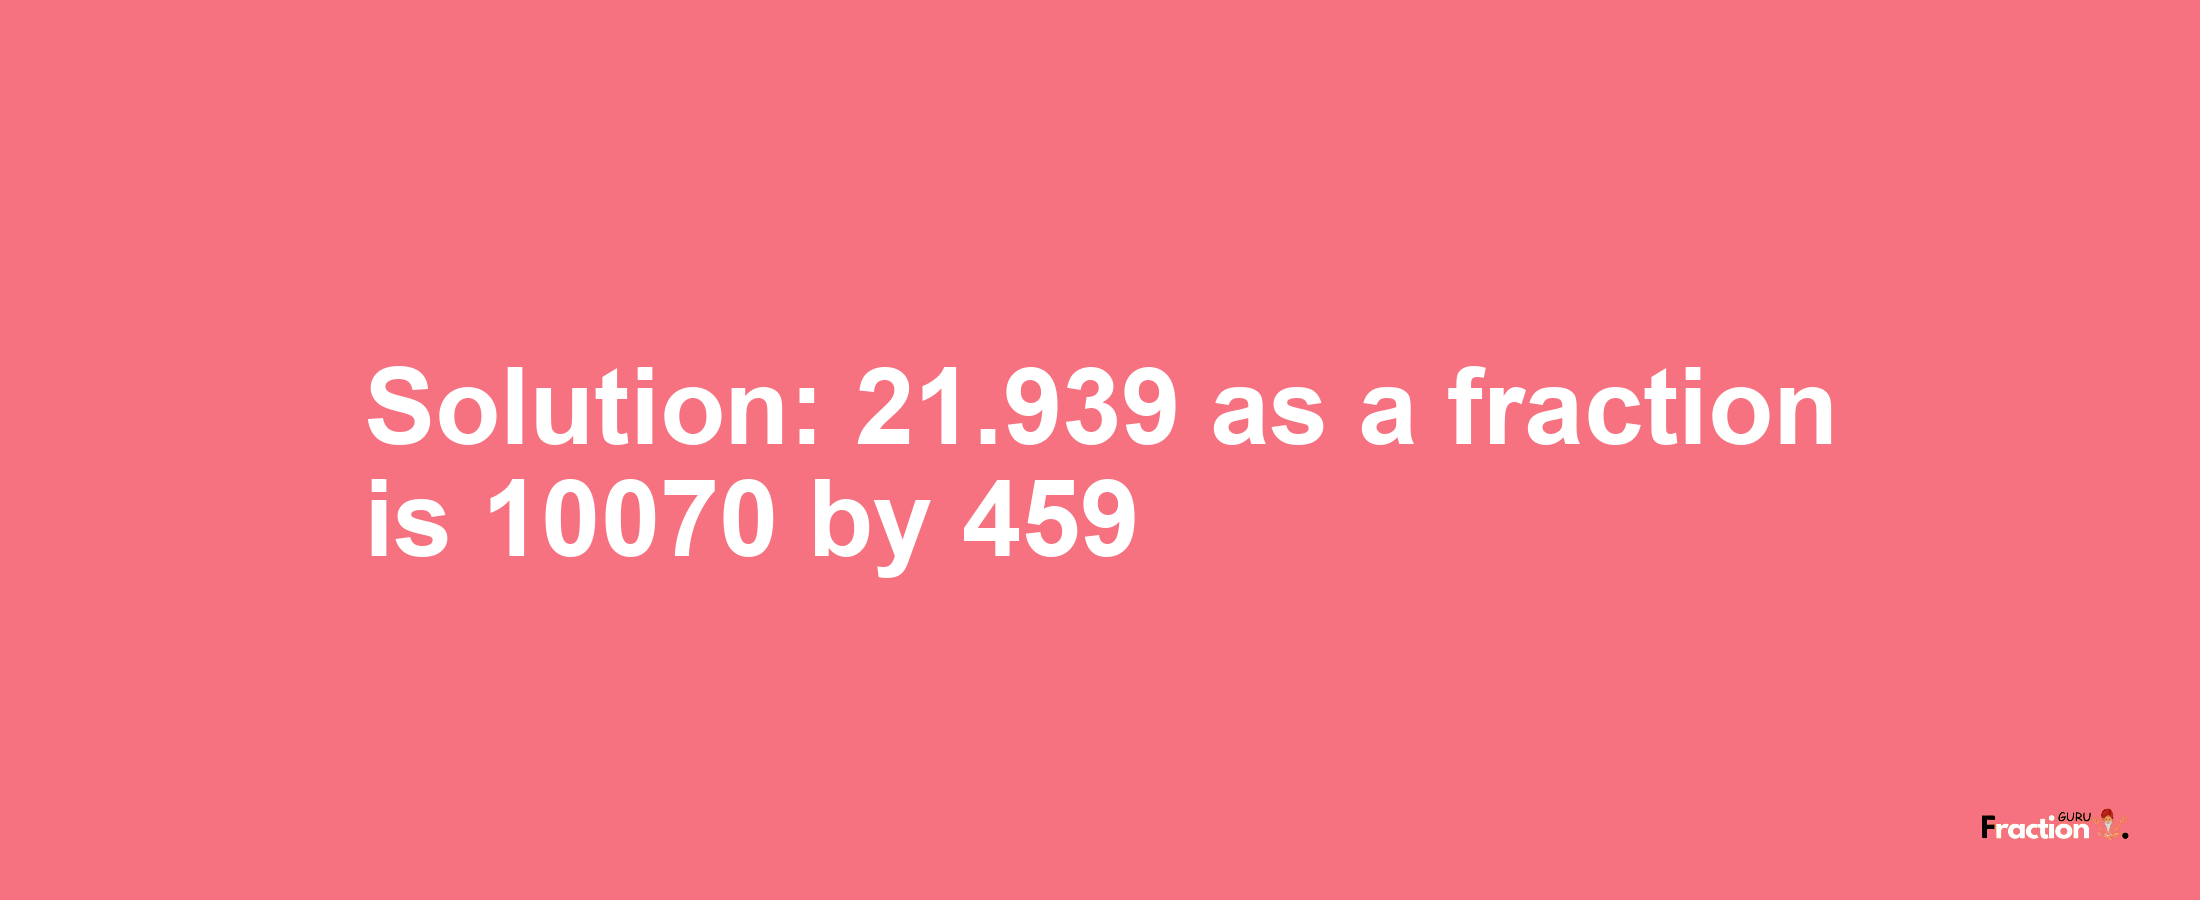 Solution:21.939 as a fraction is 10070/459